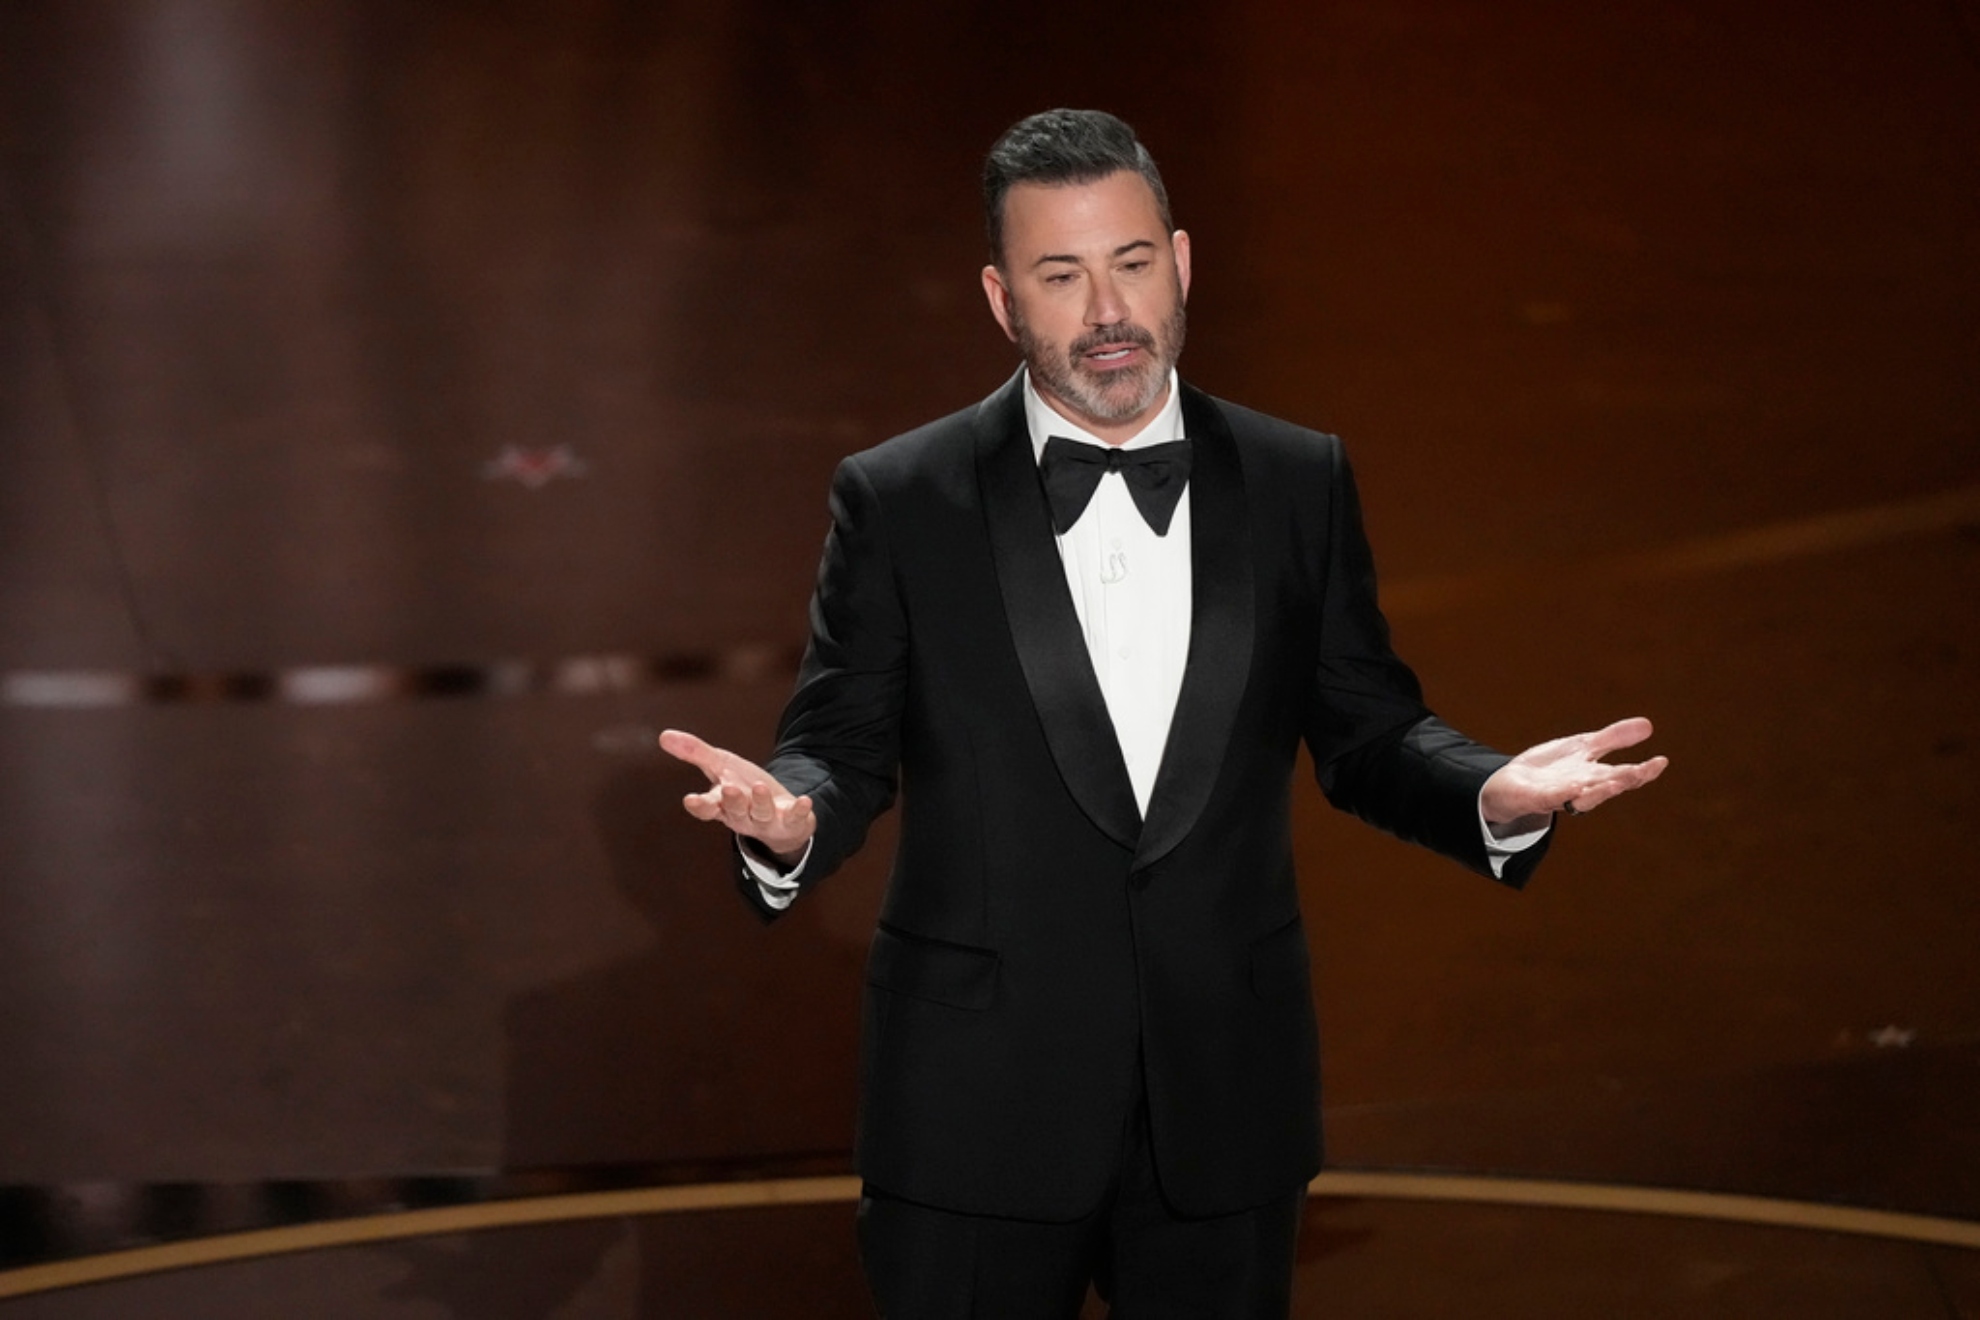 Jimmy Kimmel awkwardly bombs when asking Robert Downey Jr a question about his penis during the Oscars